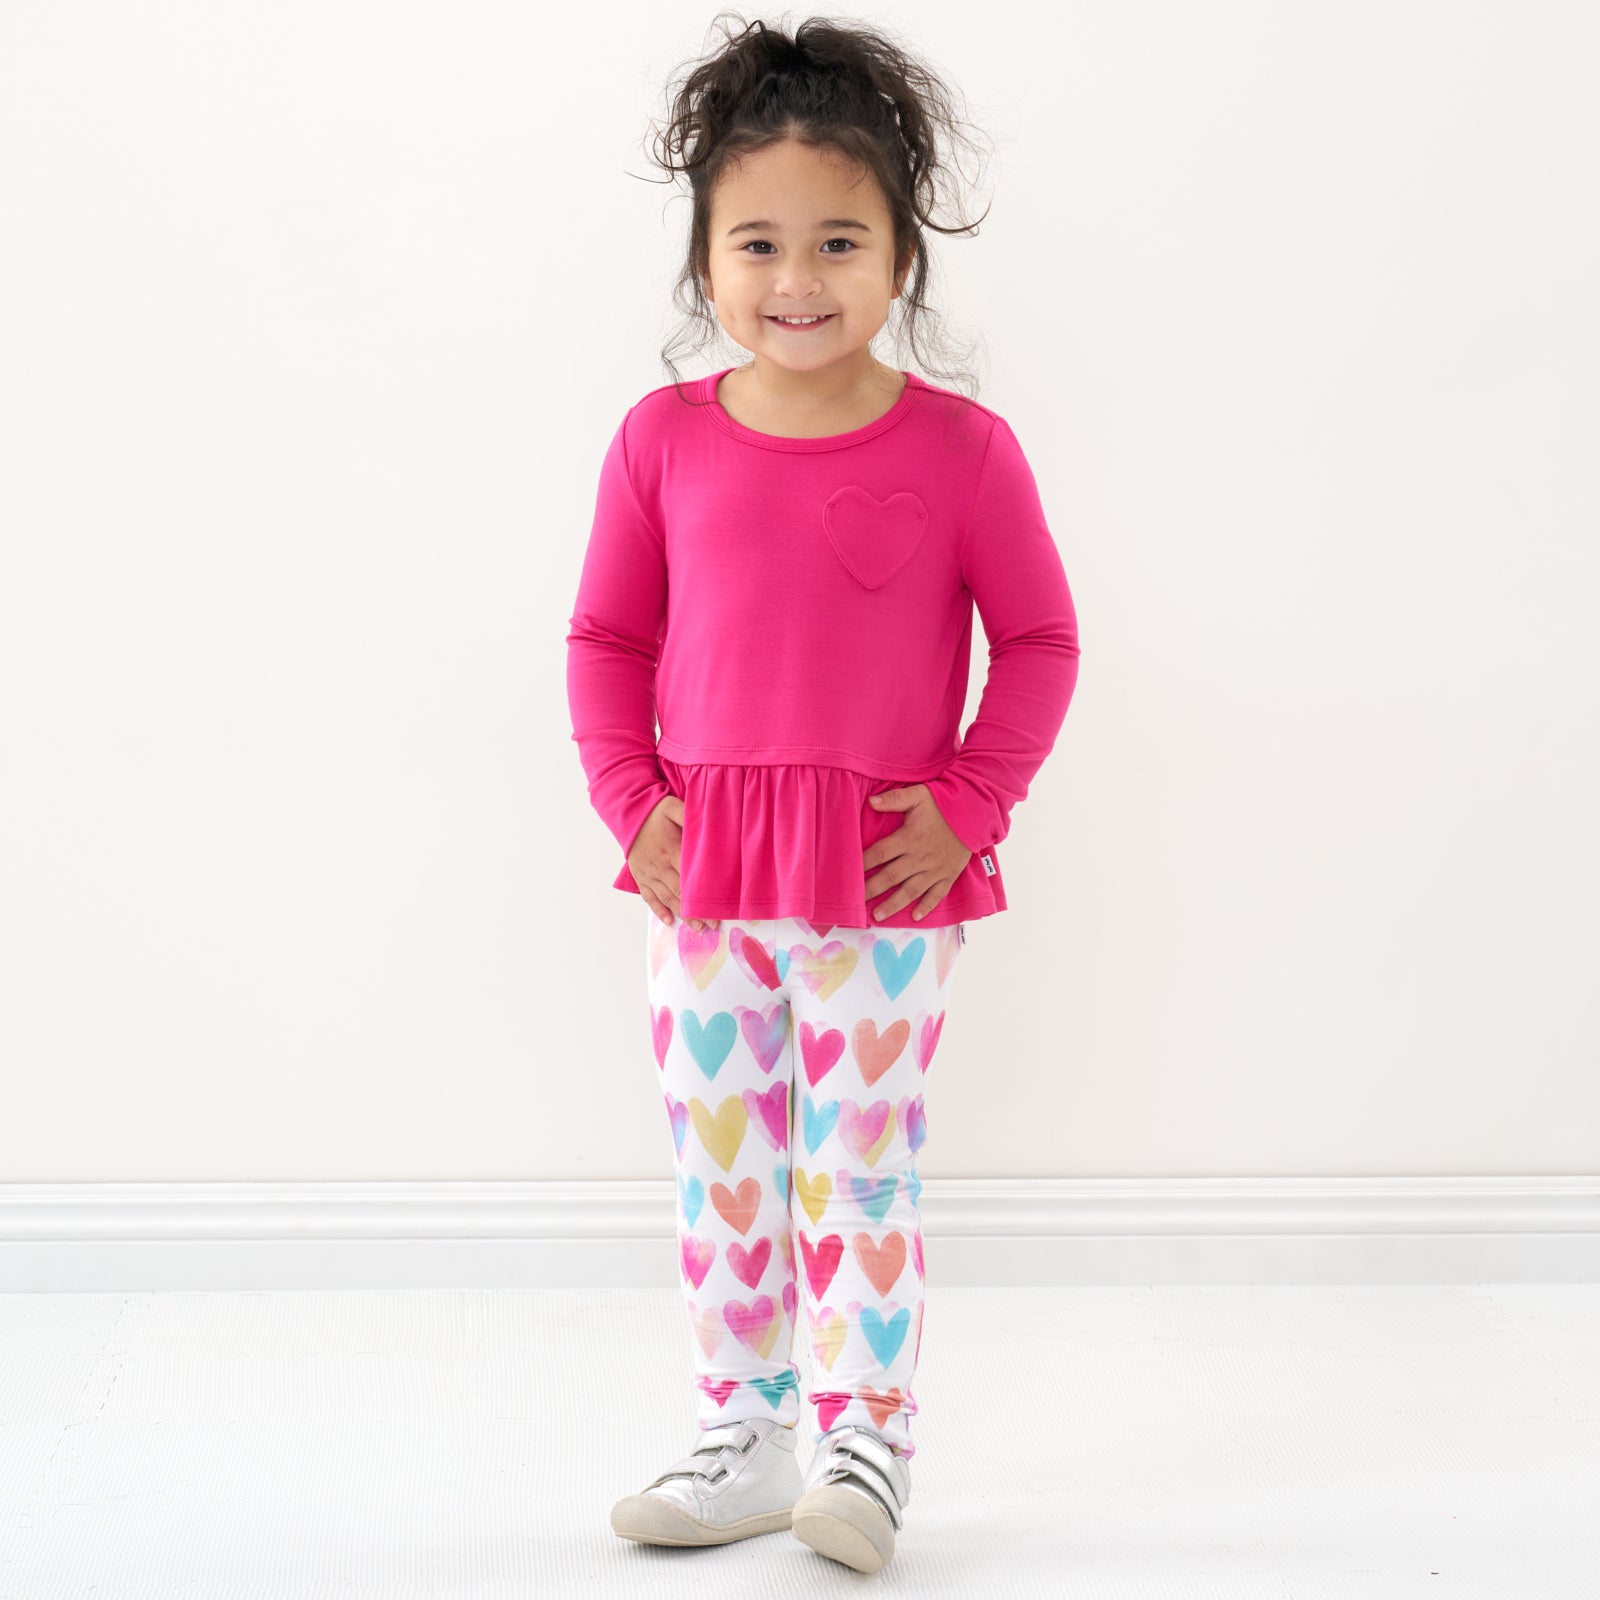 Child wearing a Pink Punch peplum tee and coordinating leggings